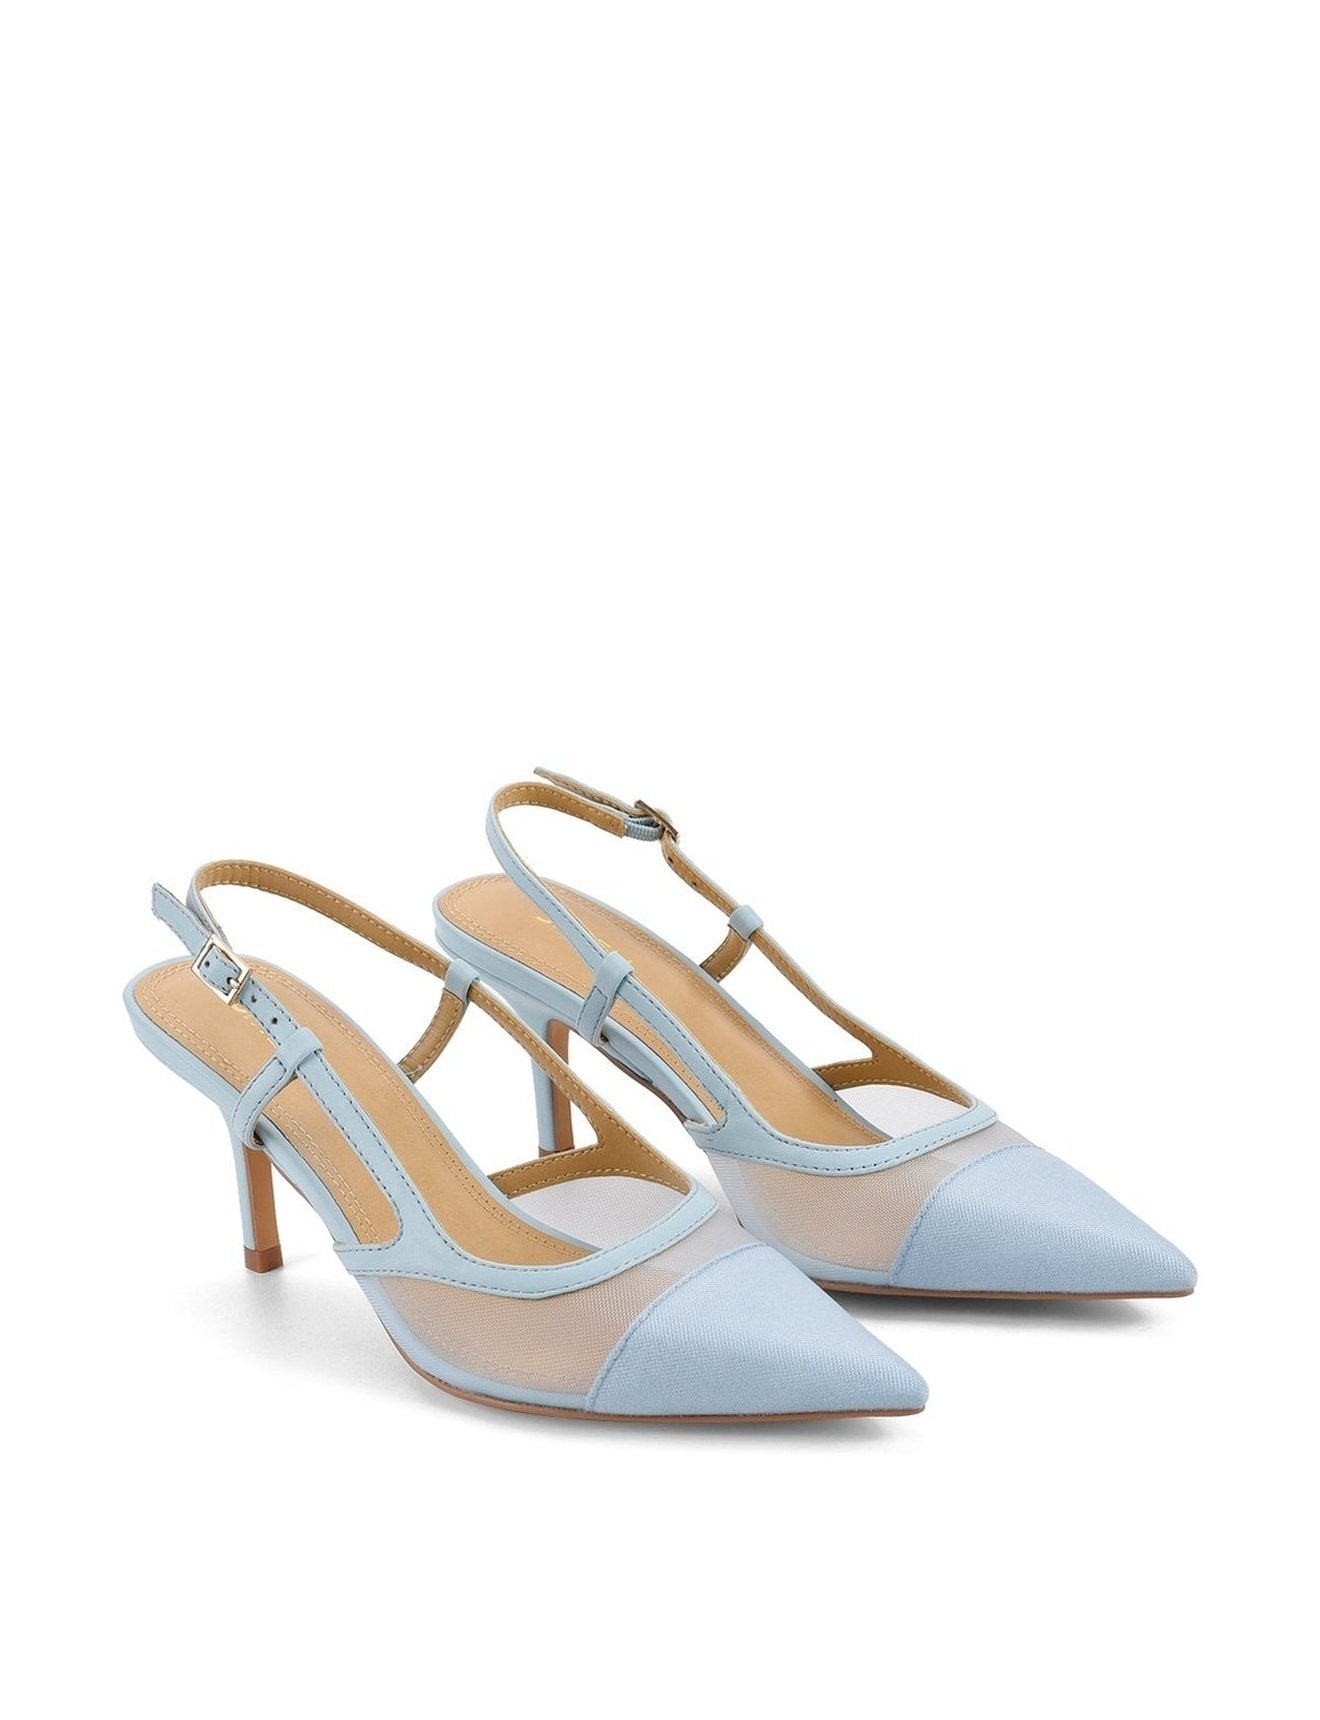 Pale blue leather slingback pointed toe pumps with mesh detailing and adjustable buckle fastening